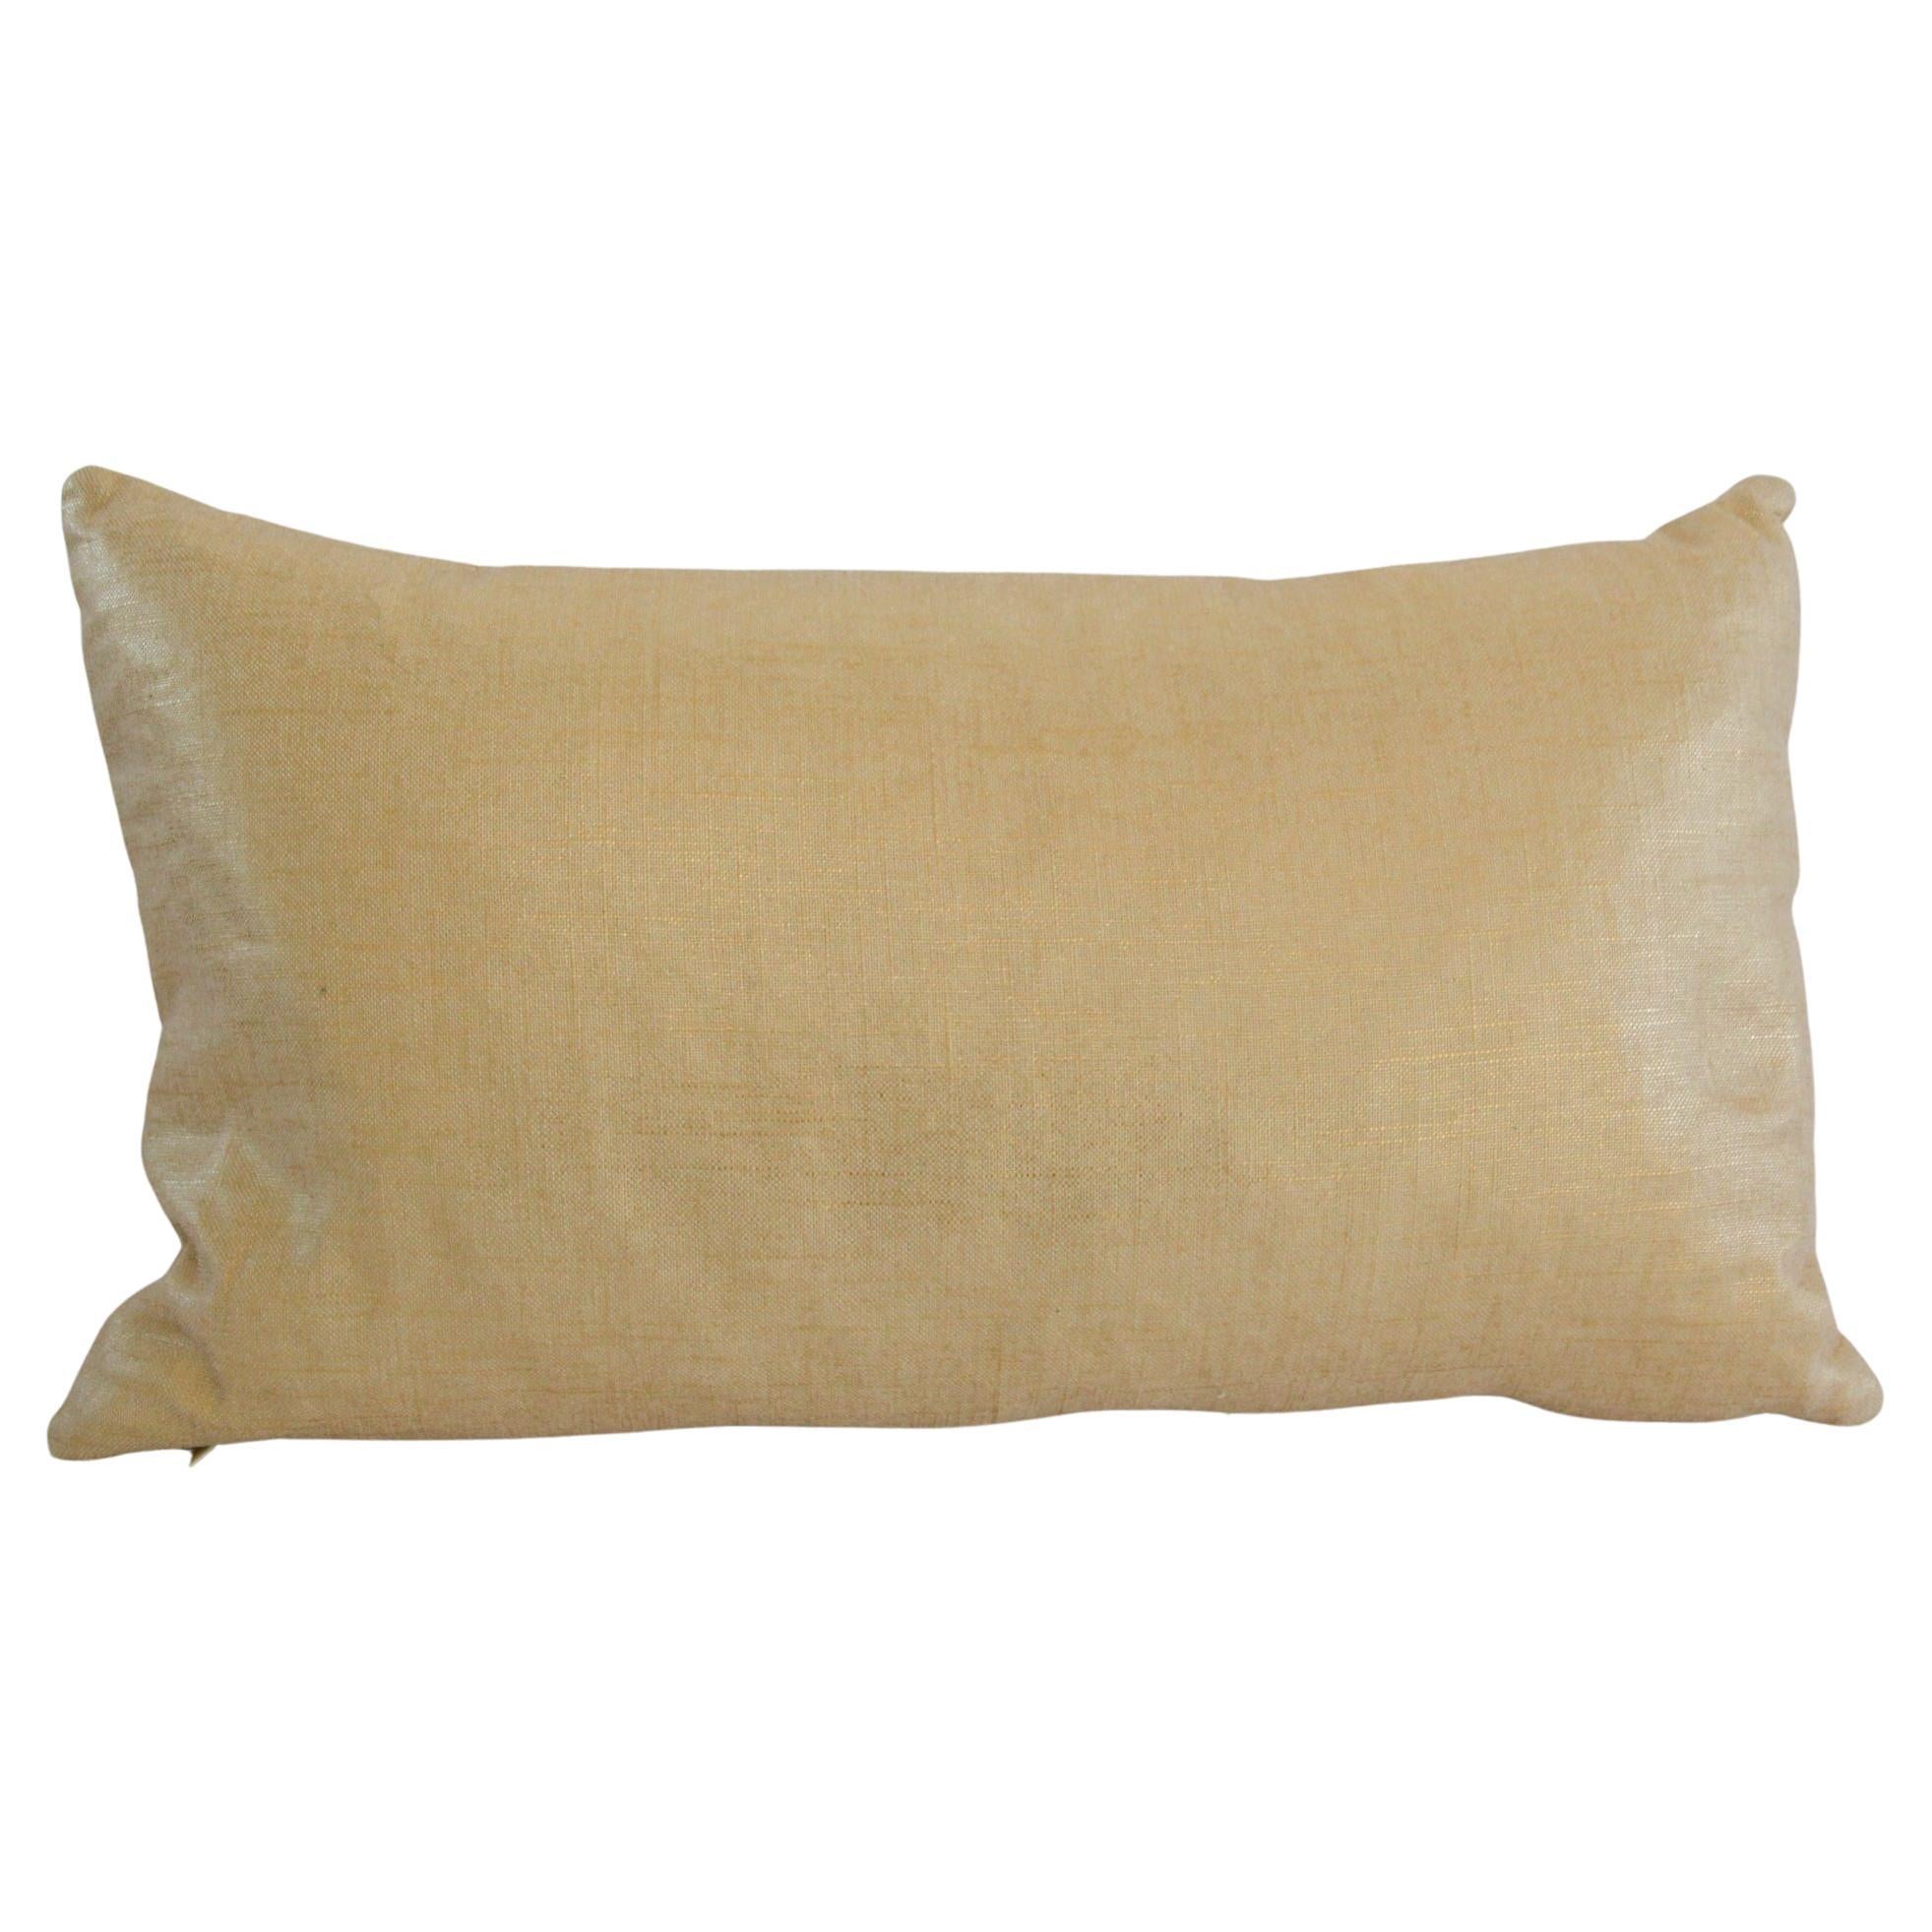 Vintage Lumbar Throw Pillow in Champagne Gold Shimmer For Sale